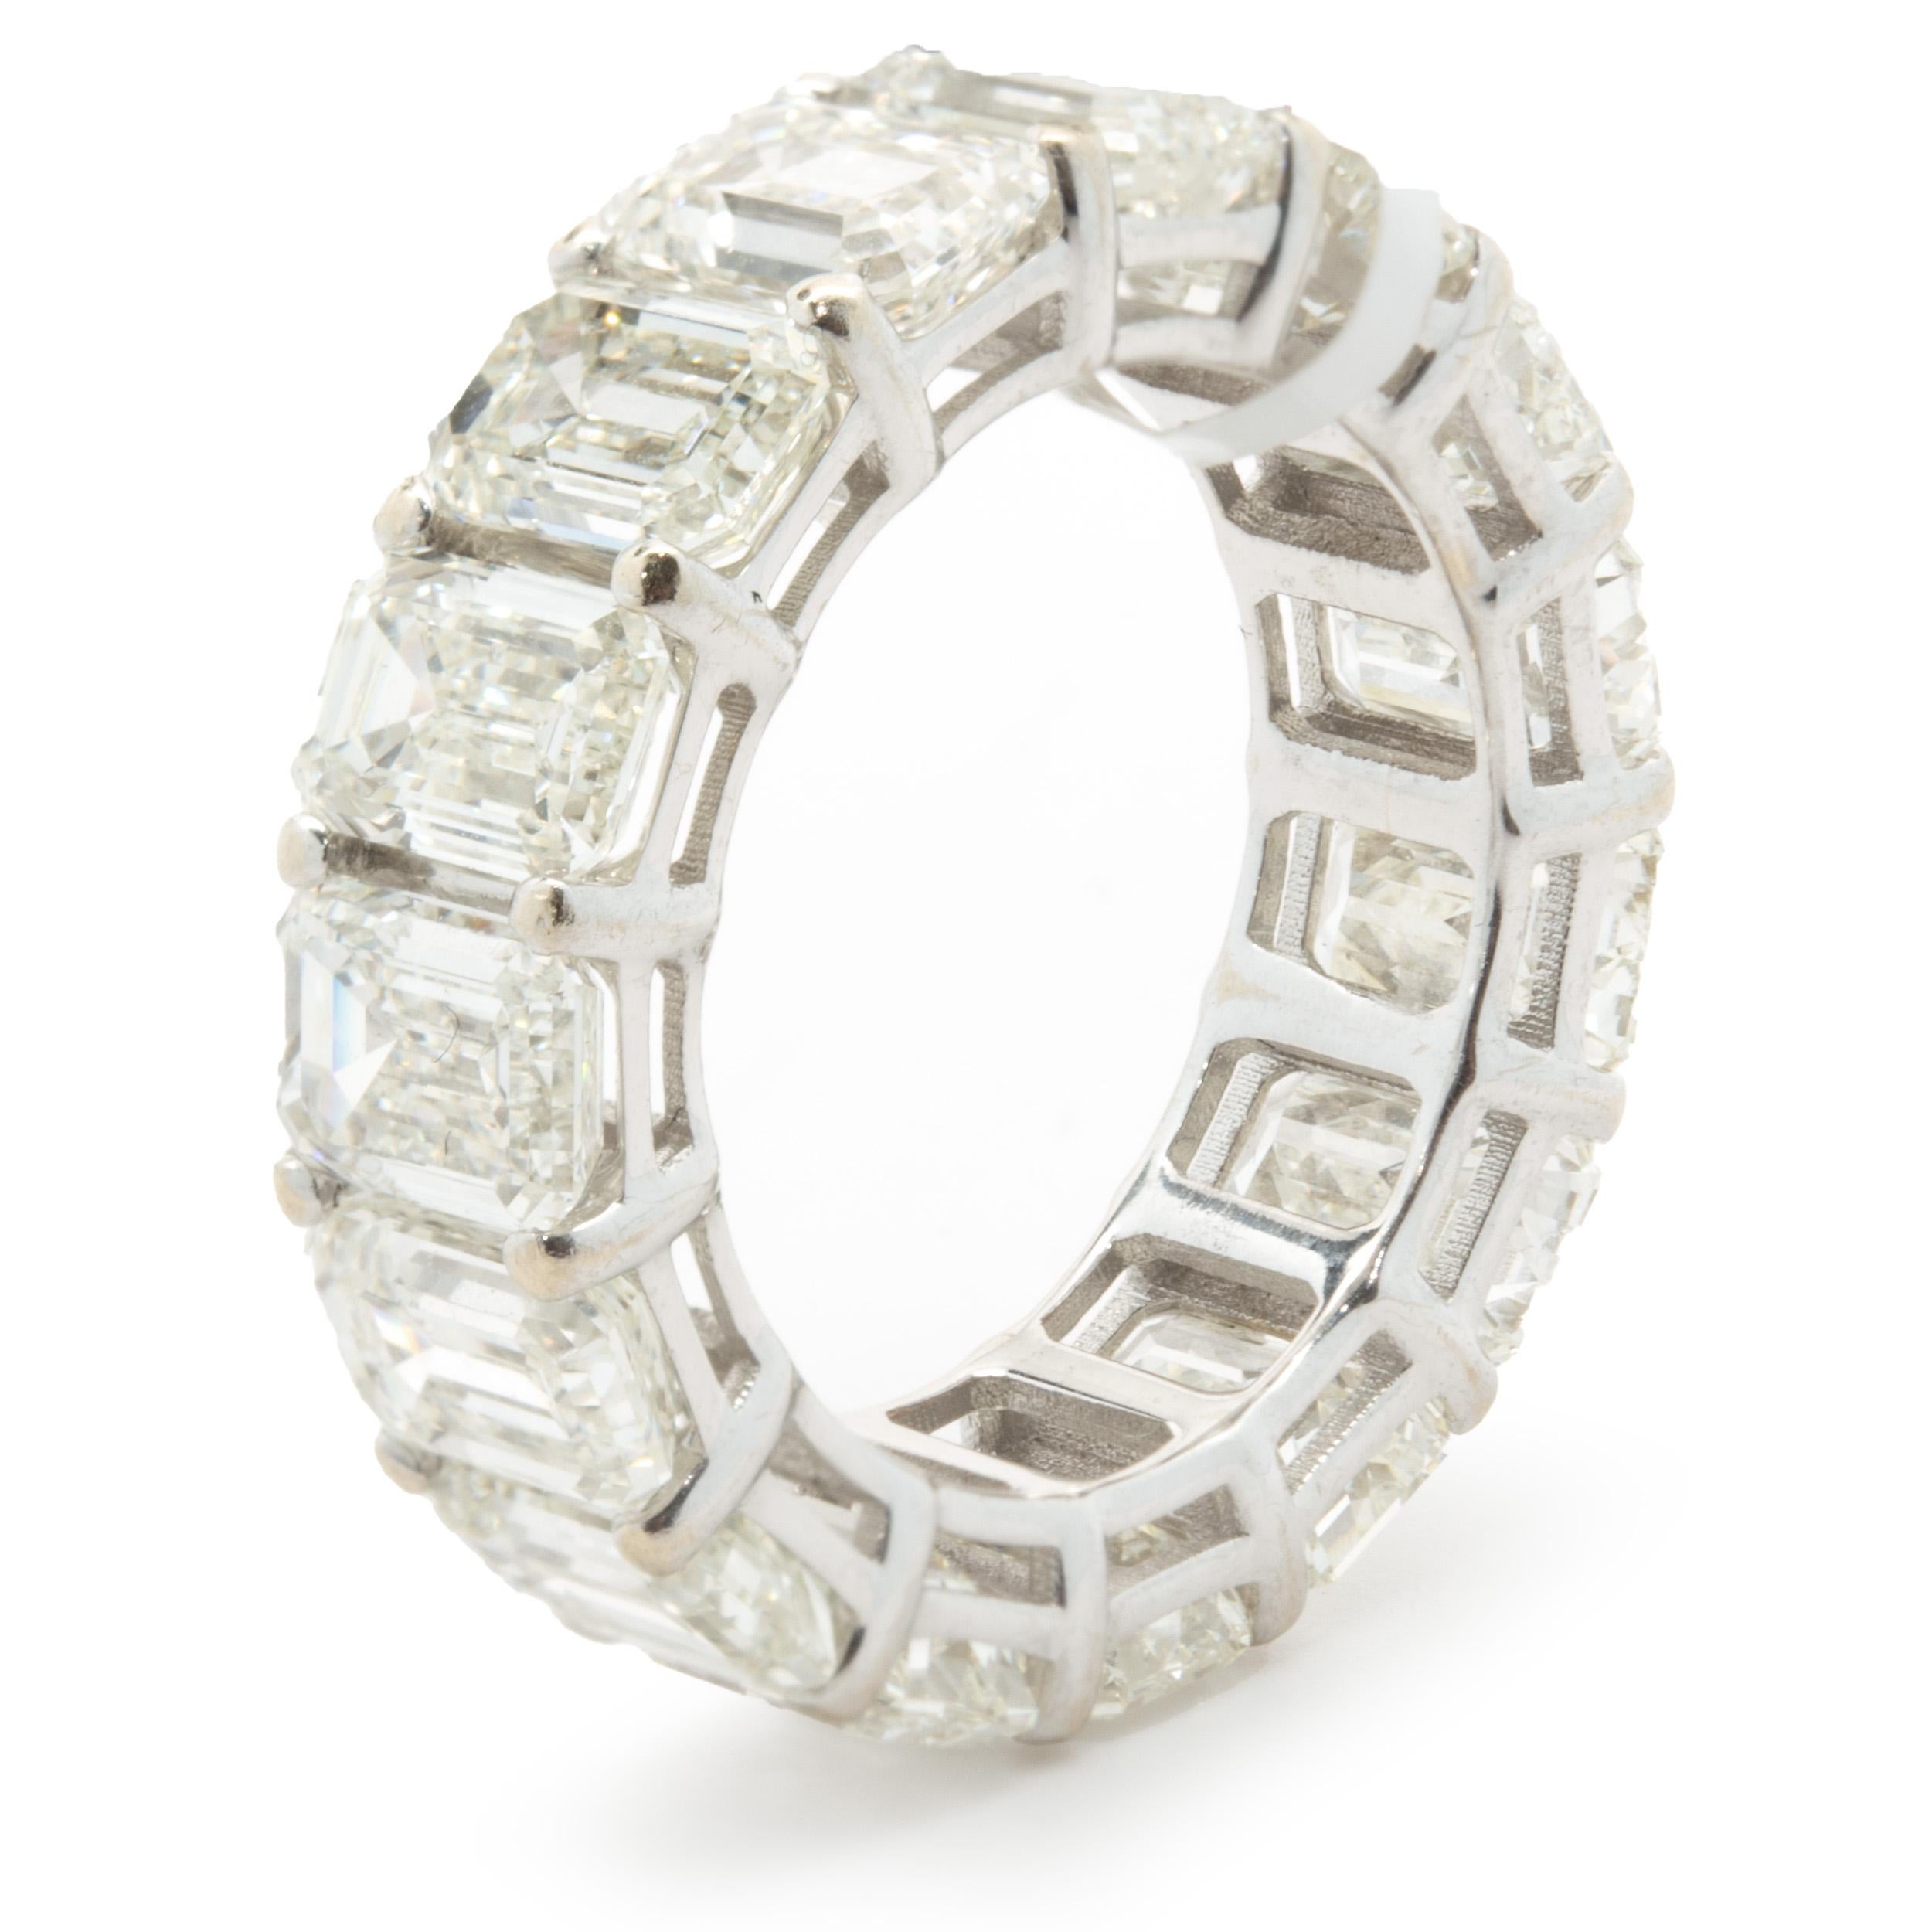 Designer: Custom
Material: 18k white gold 
Diamonds: 15 emerald cut = 11.98cttw
Color: H / I
Clarity: VS1
Size: 6.25
Dimensions: ring measures 6.31mm in width
Size: 6.25
Weight: 6.68 grams
